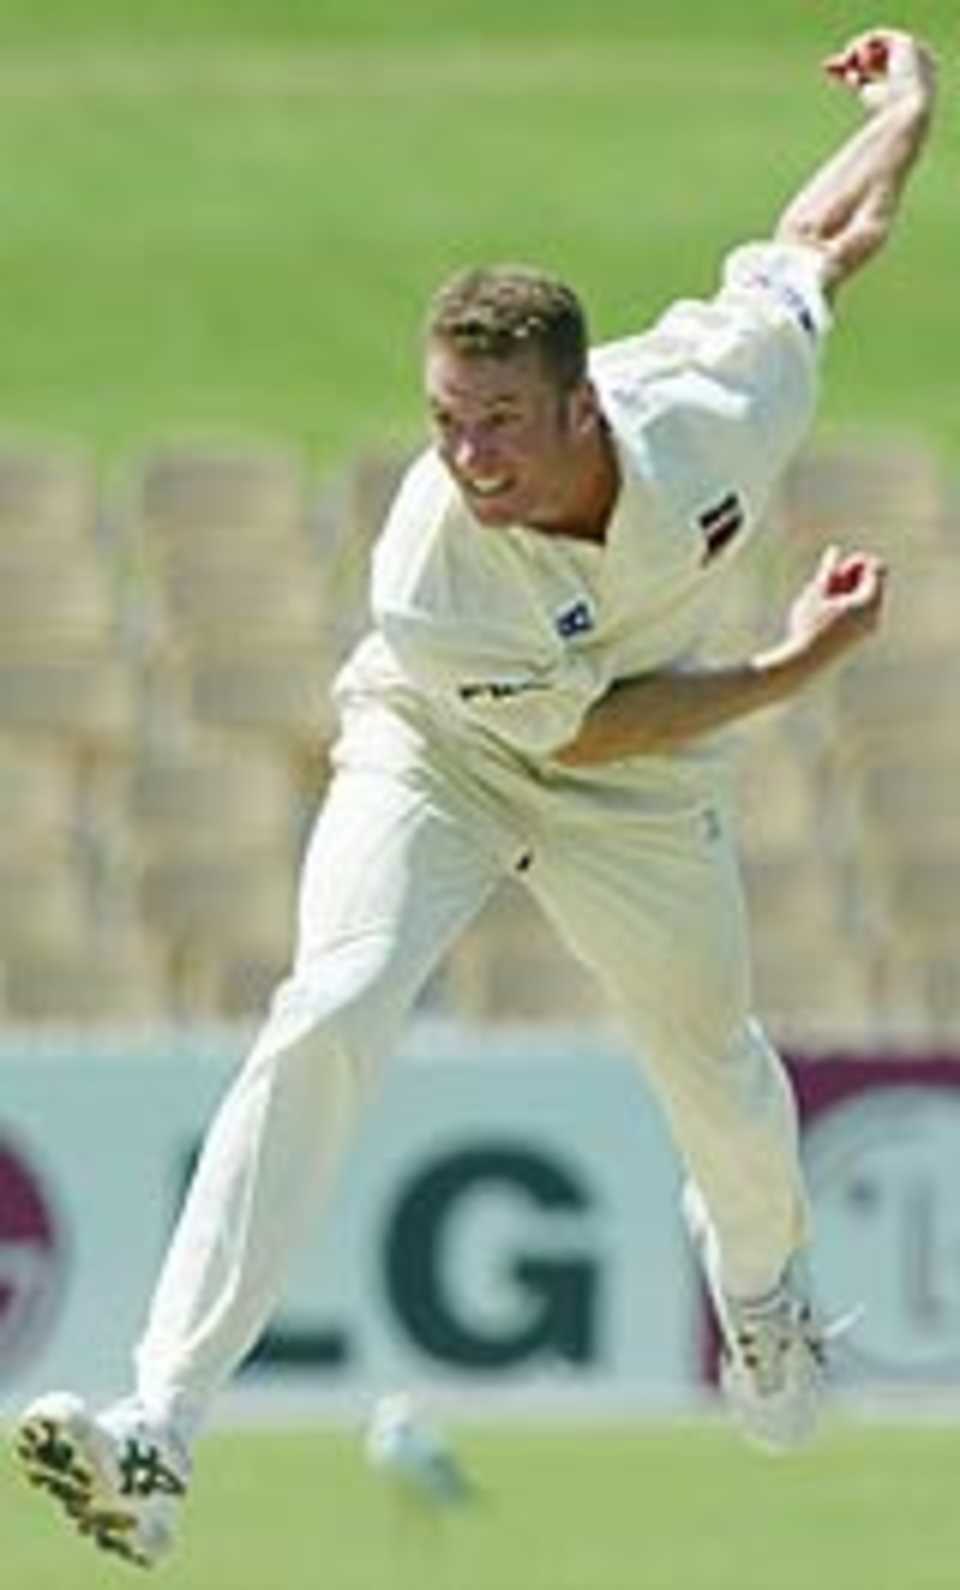 South Australian bowler Paul Rofe in action in the ING Cup match between the Southern Redbacks and the New South Wales Bluess at Adelaide Oval November 9, 2003 in Adelaide, Australia